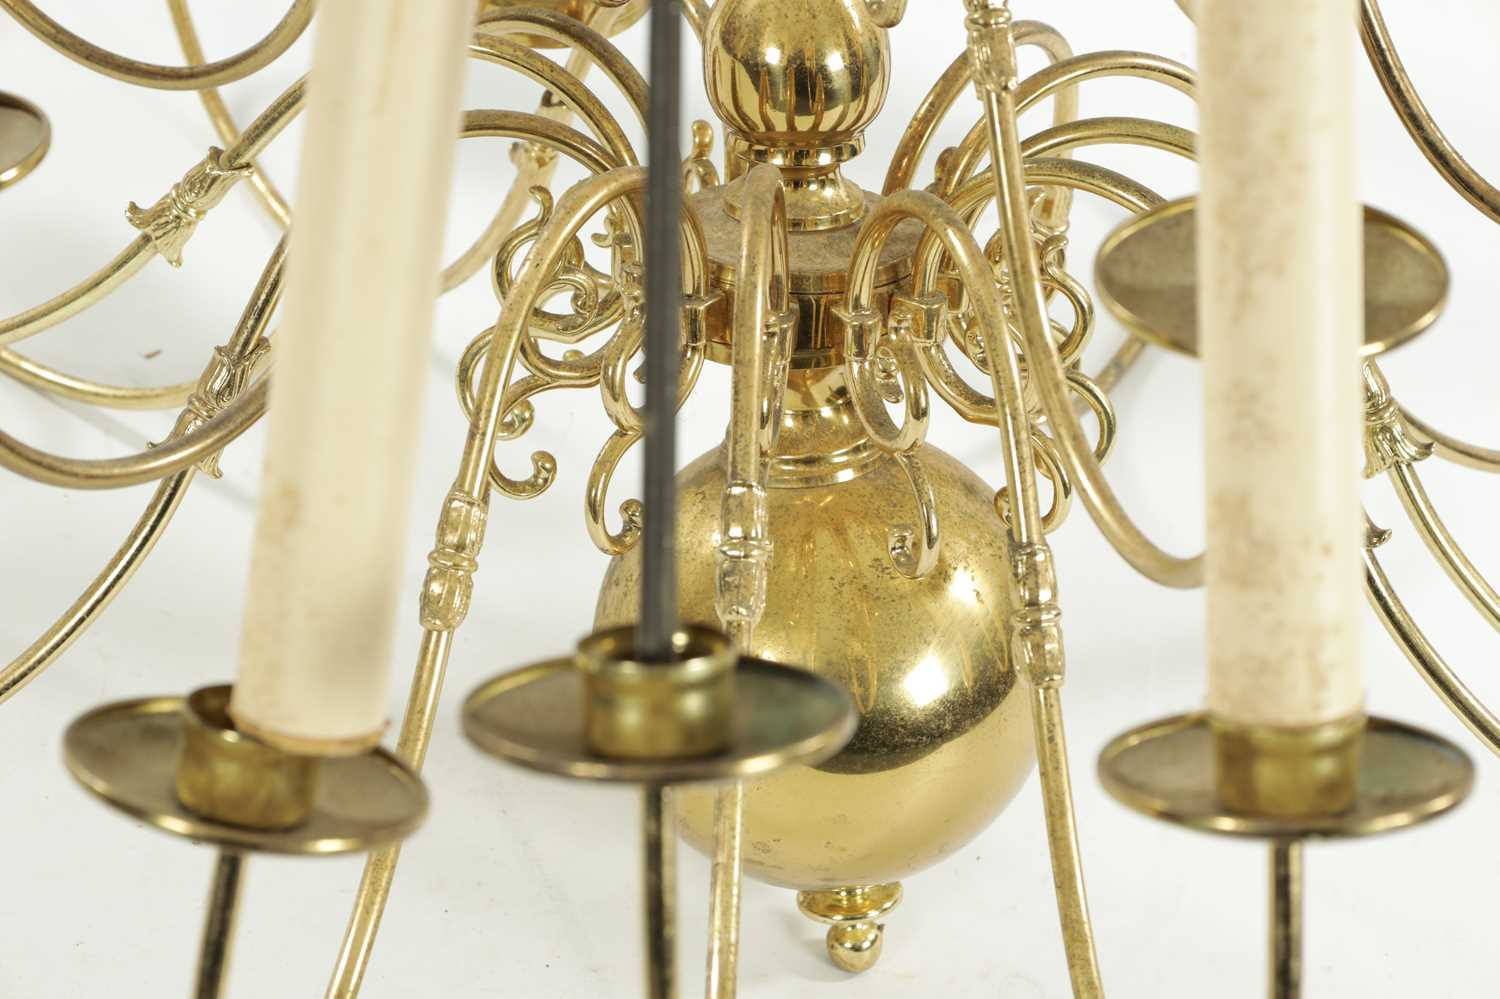 A LARGE 20TH CENTURY BRASS HANGING LIGHT - Image 7 of 7